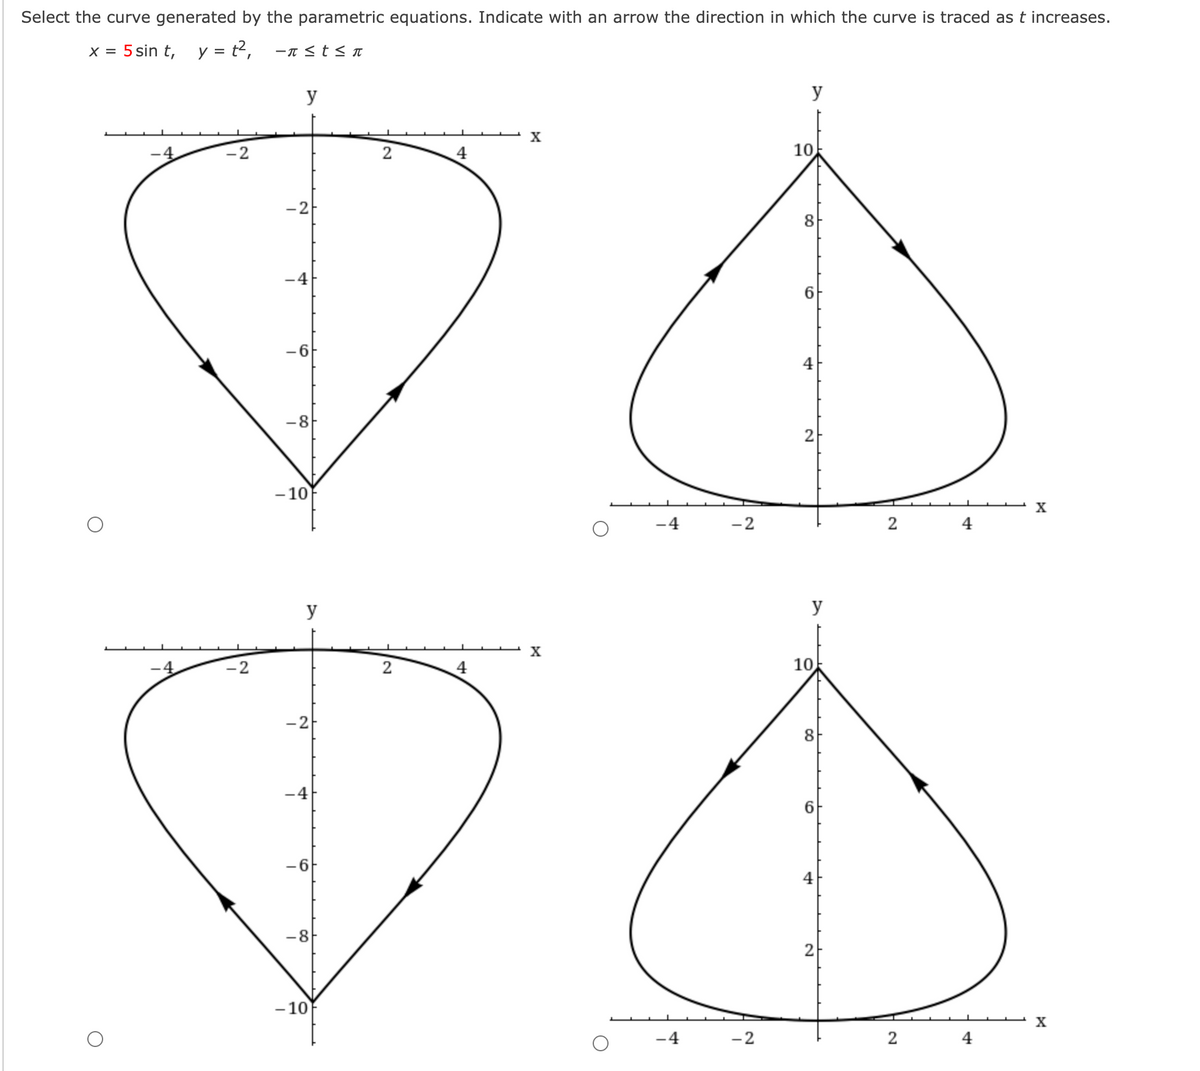 Select the curve generated by the parametric equations. Indicate with an arrow the direction in which the curve is traced as t increases.
X = 5 sin t, y = t², -π ≤ t ≤ π
-2
y
-2
-6
8
-10
y
-2
-4
-10
2
2
4
4
X
X
-4
-4
-2
-2
y
10
8
Co
6
4
2
y
10
8
2
2
2
4
4
X